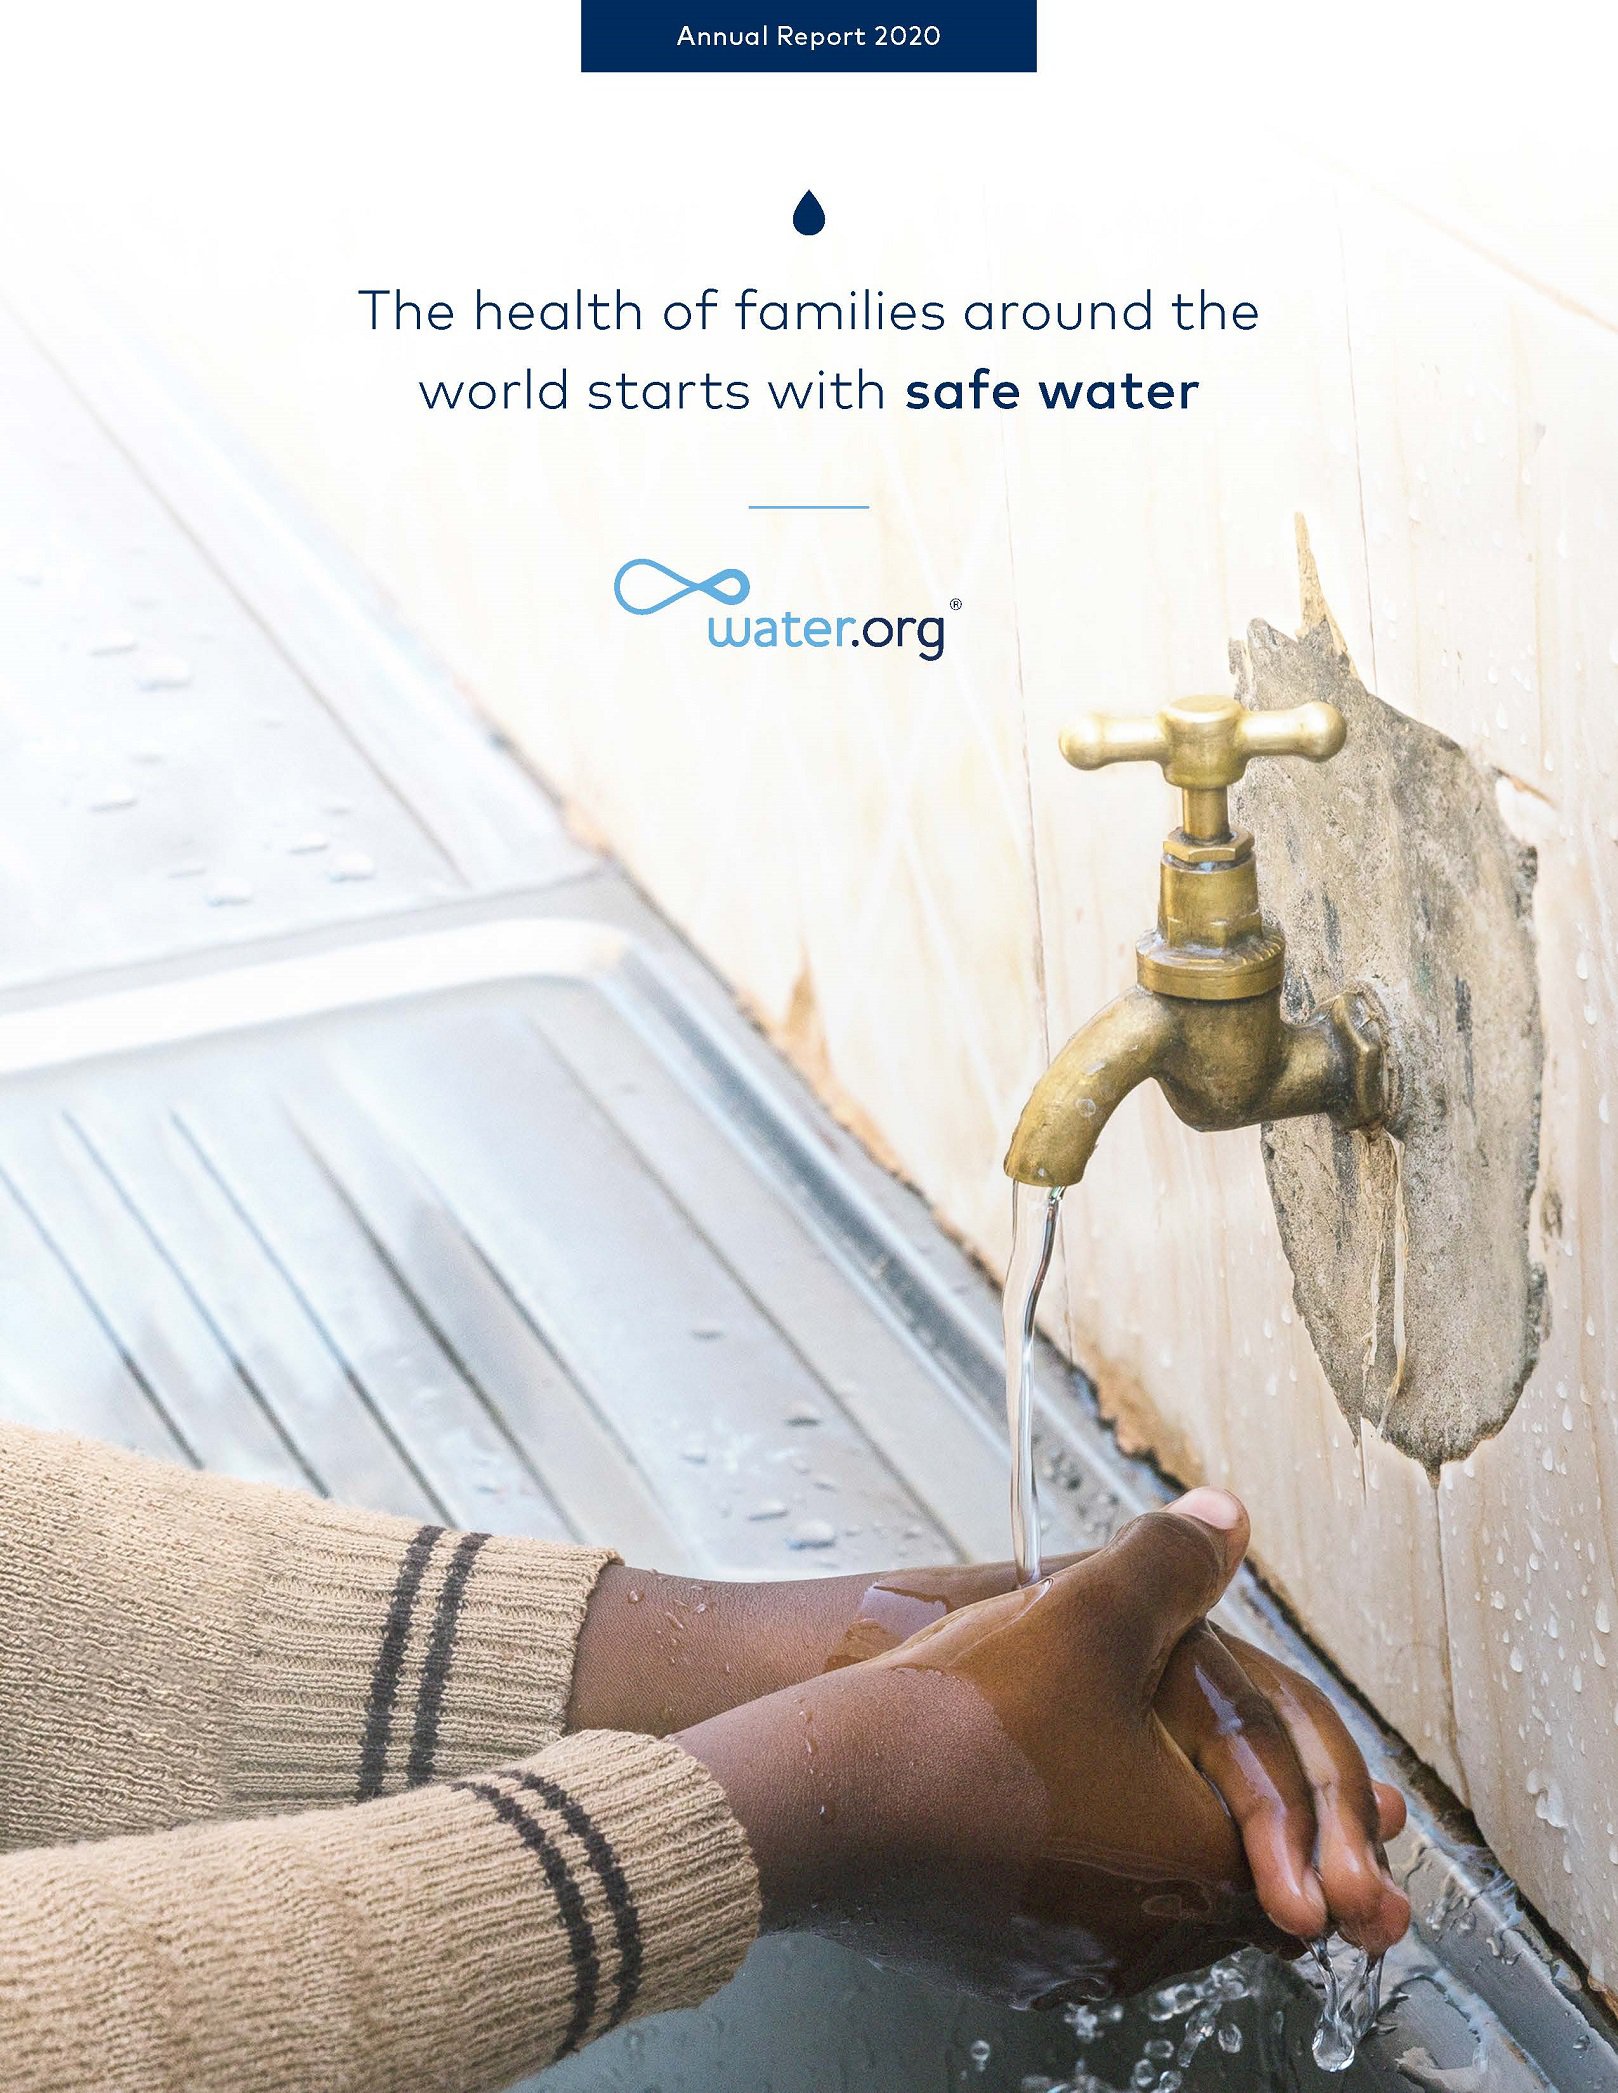 Water.org 2020 Annual Report cover.jpg